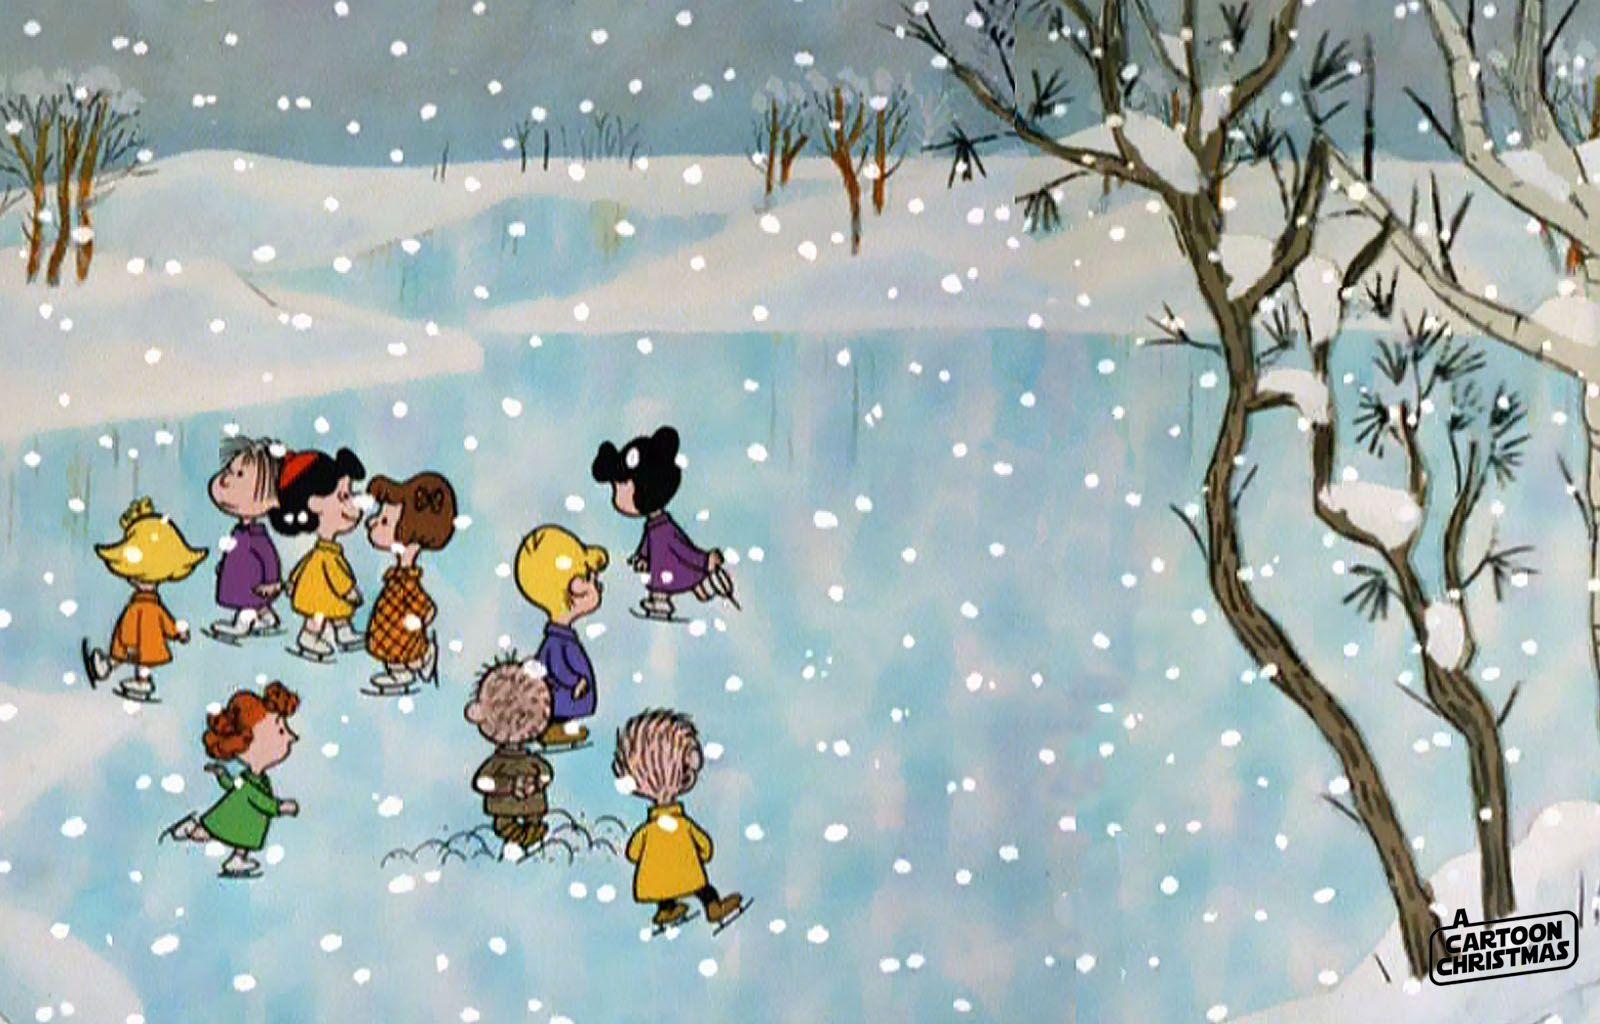 Get your Charlie Brown Chrismas Wallpaper right here!